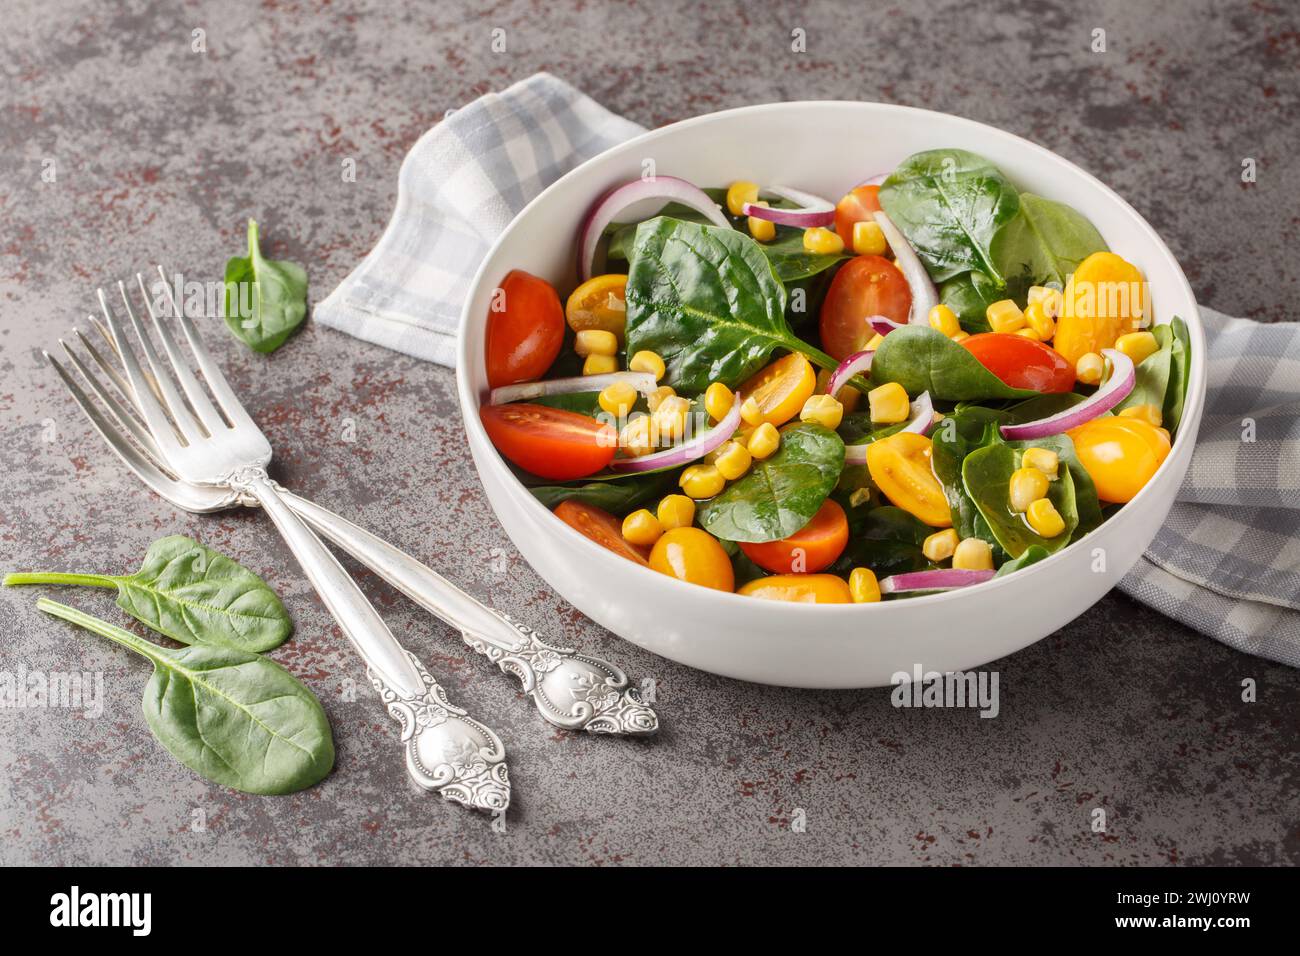 Dietary vegetarian salad of baby spinach, corn, cherry tomatoes and onions dressed with olive oil close-up in a bowl on the table. Horizontal Stock Photo